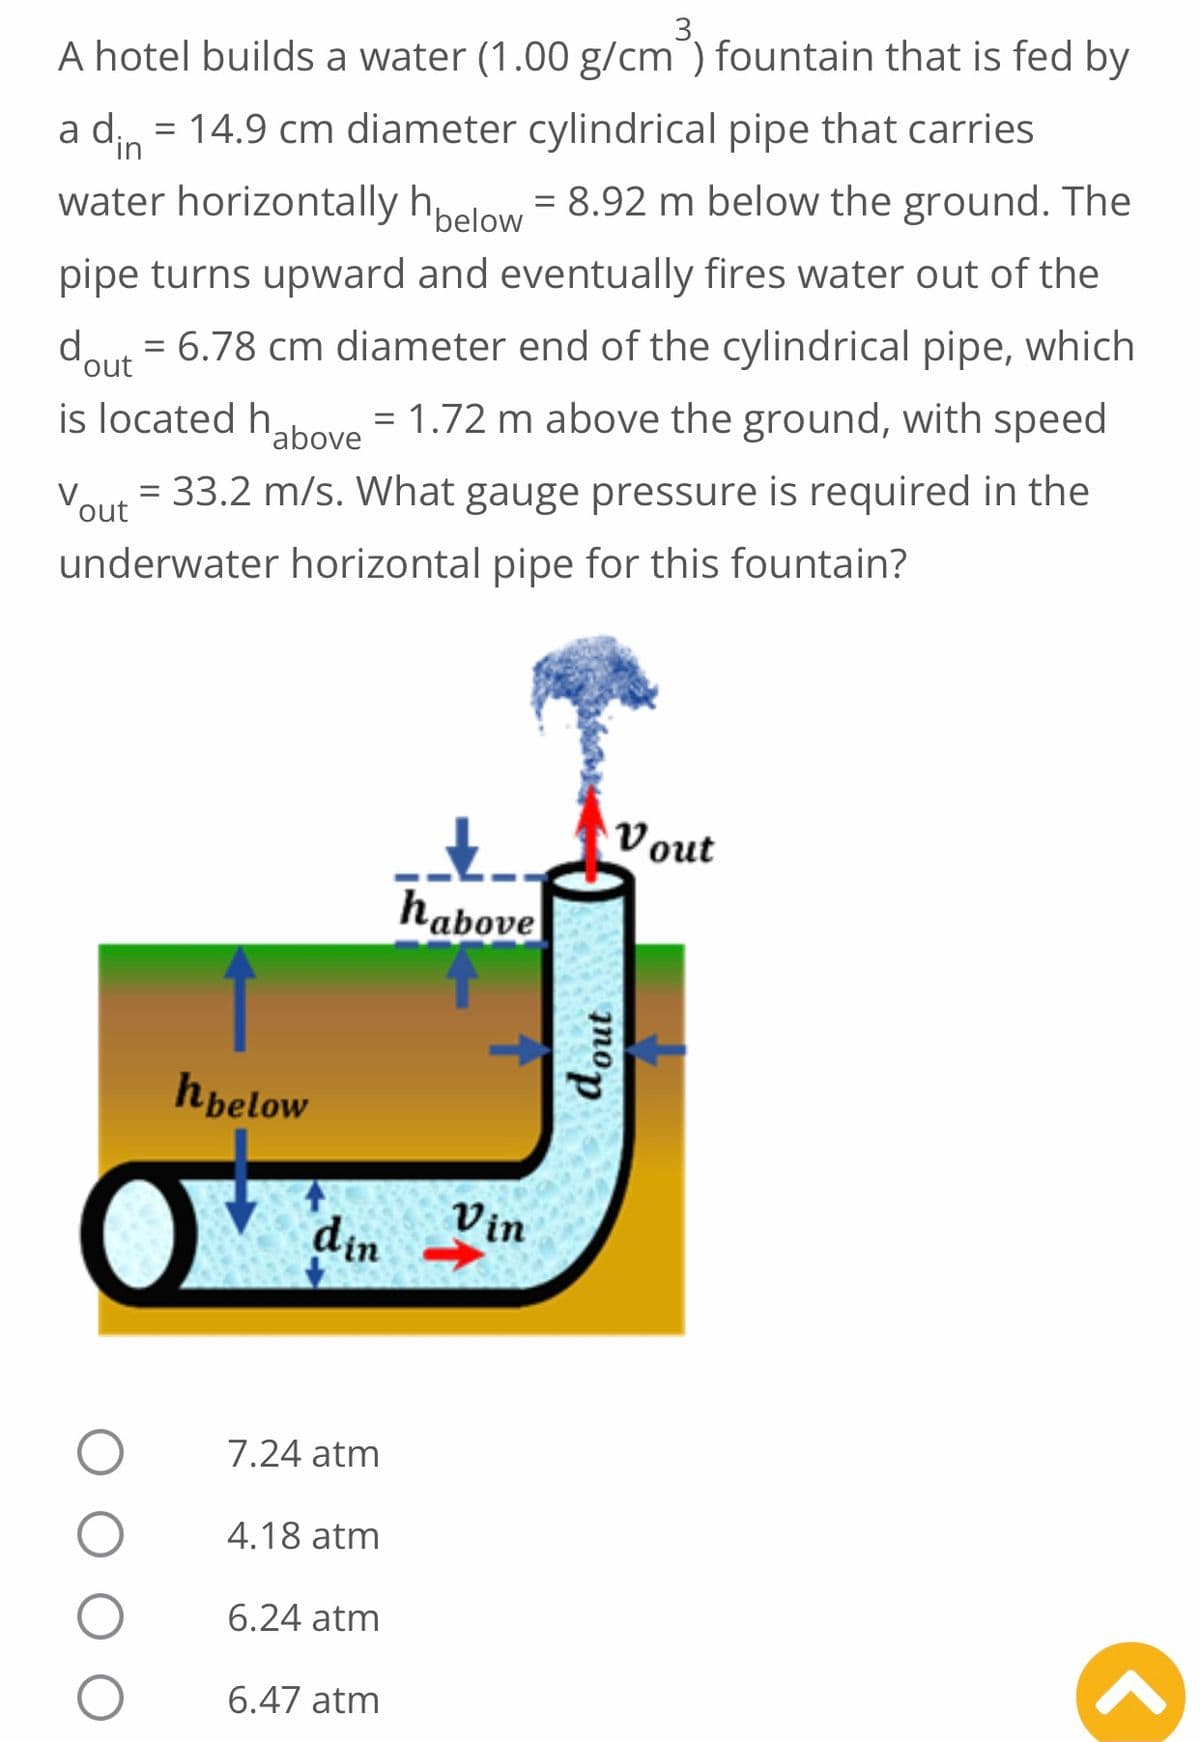 3
A hotel builds a water (1.00 g/cm) fountain that is fed by
a din = 14.9 cm diameter cylindrical pipe that carries
water horizontally hbelow = 8.92 m below the ground. The
pipe turns upward and eventually fires water out of the
= 6.78 cm diameter end of the cylindrical pipe, which
is located habove = 1.72 m above the ground, with speed
Vout
= 33.2 m/s. What gauge pressure is required in the
underwater horizontal pipe for this fountain?
dout
Vout
t
habove
h below
O
Vin
din
7.24 atm
4.18 atm
6.24 atm
6.47 atm
mop
<